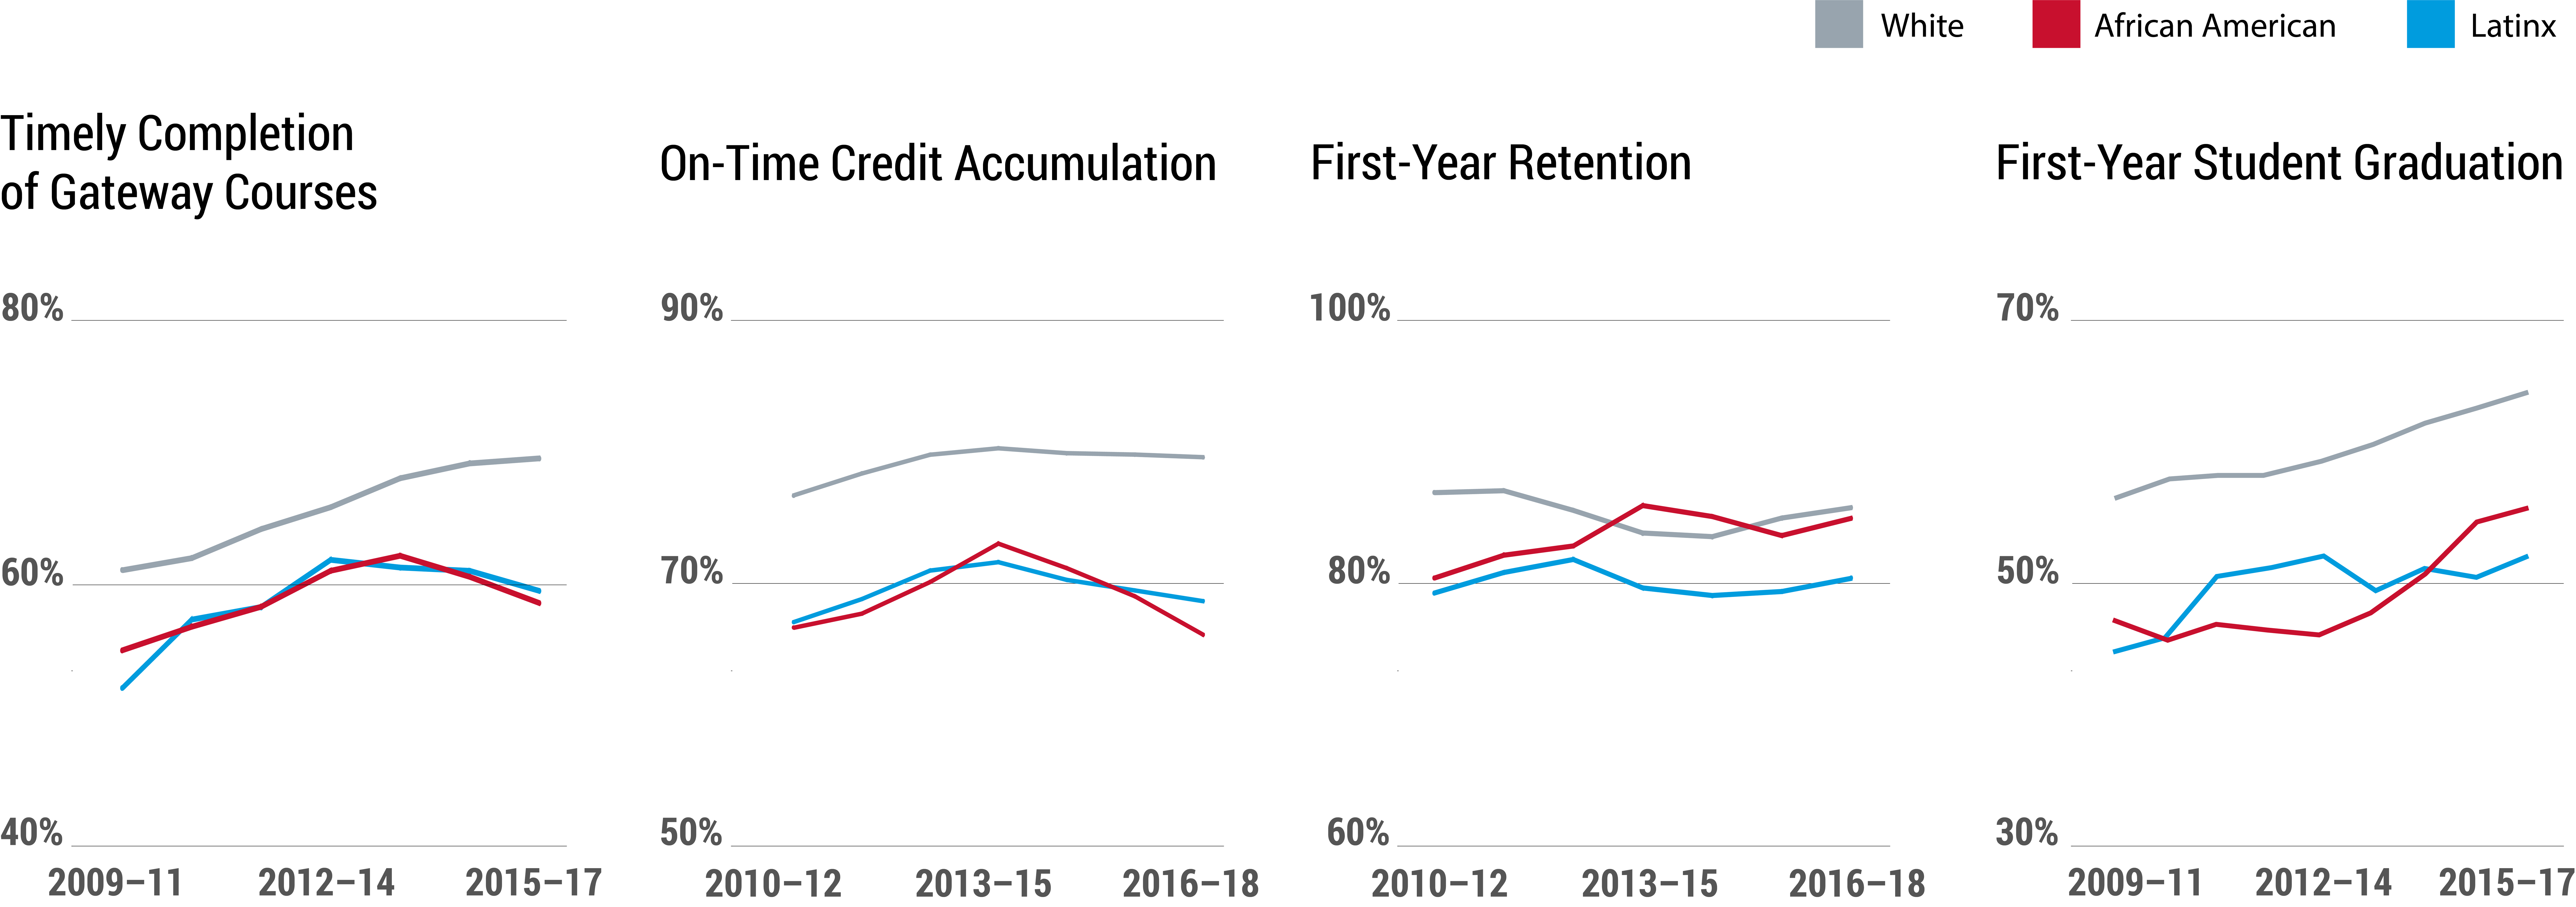 Figure 5 contains four graphs on state university success metrics, showing the gaps between White, African-American, and Latinx students. From left to right, the graphs show the rates for 1) Timely completion of Gateway Courses, 2) On-Time Credit Accumulation, 3) First-Year Retention, and 4) First-Year Student Graduation. 